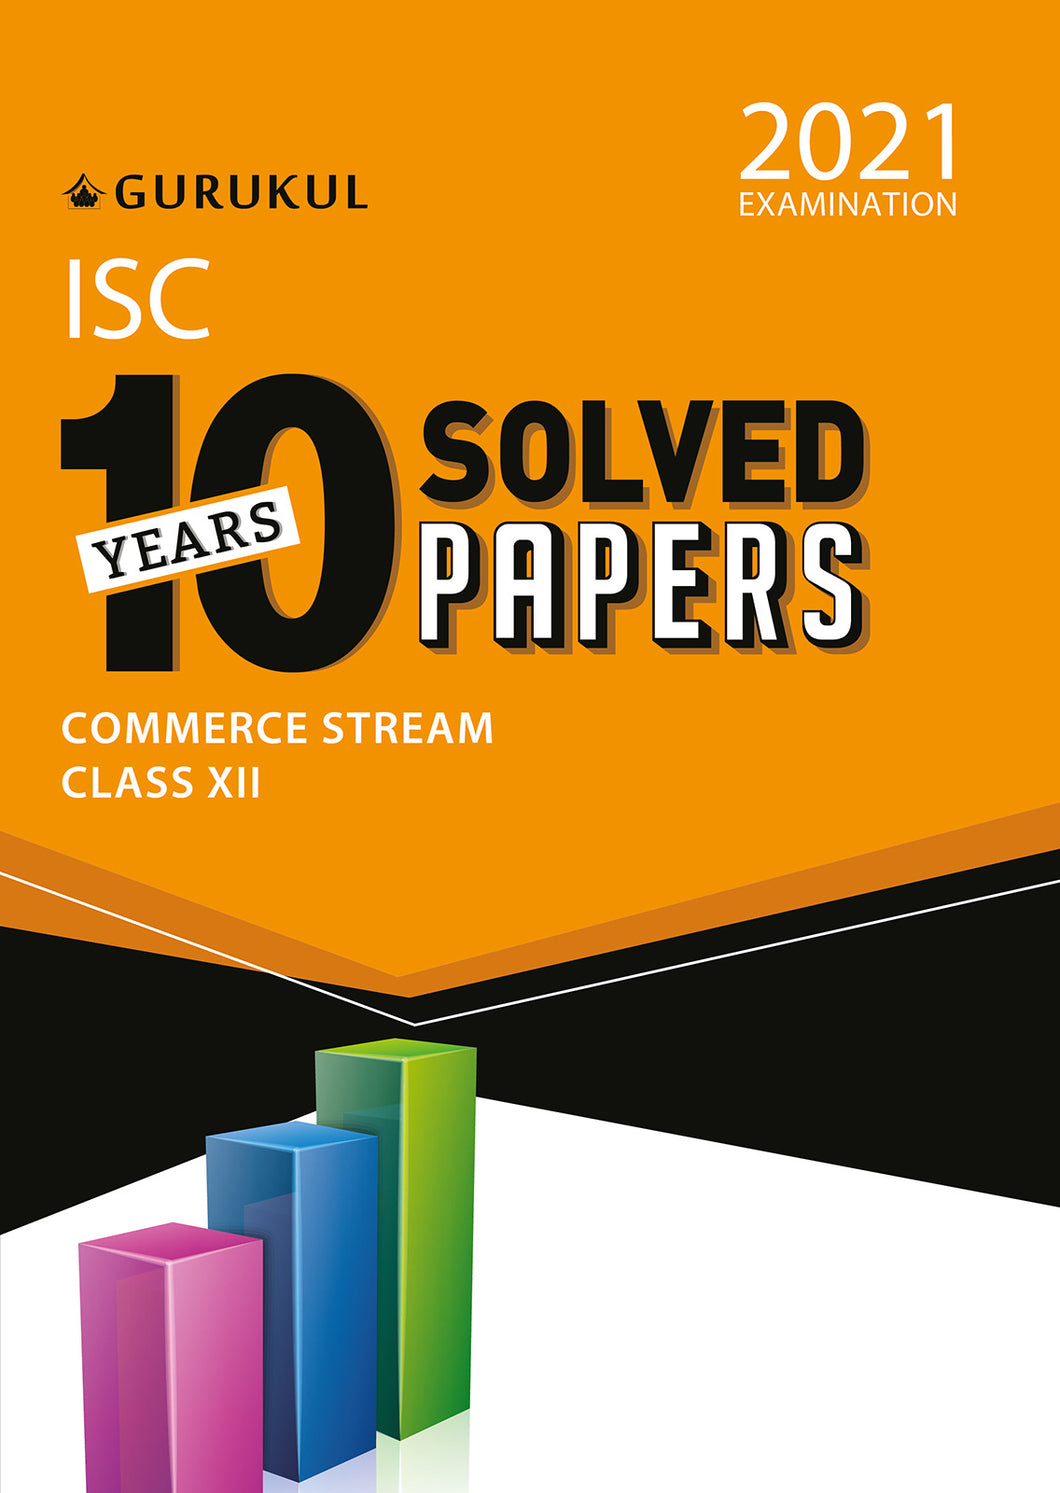 10 Years Solved Papers - ISC Commerce